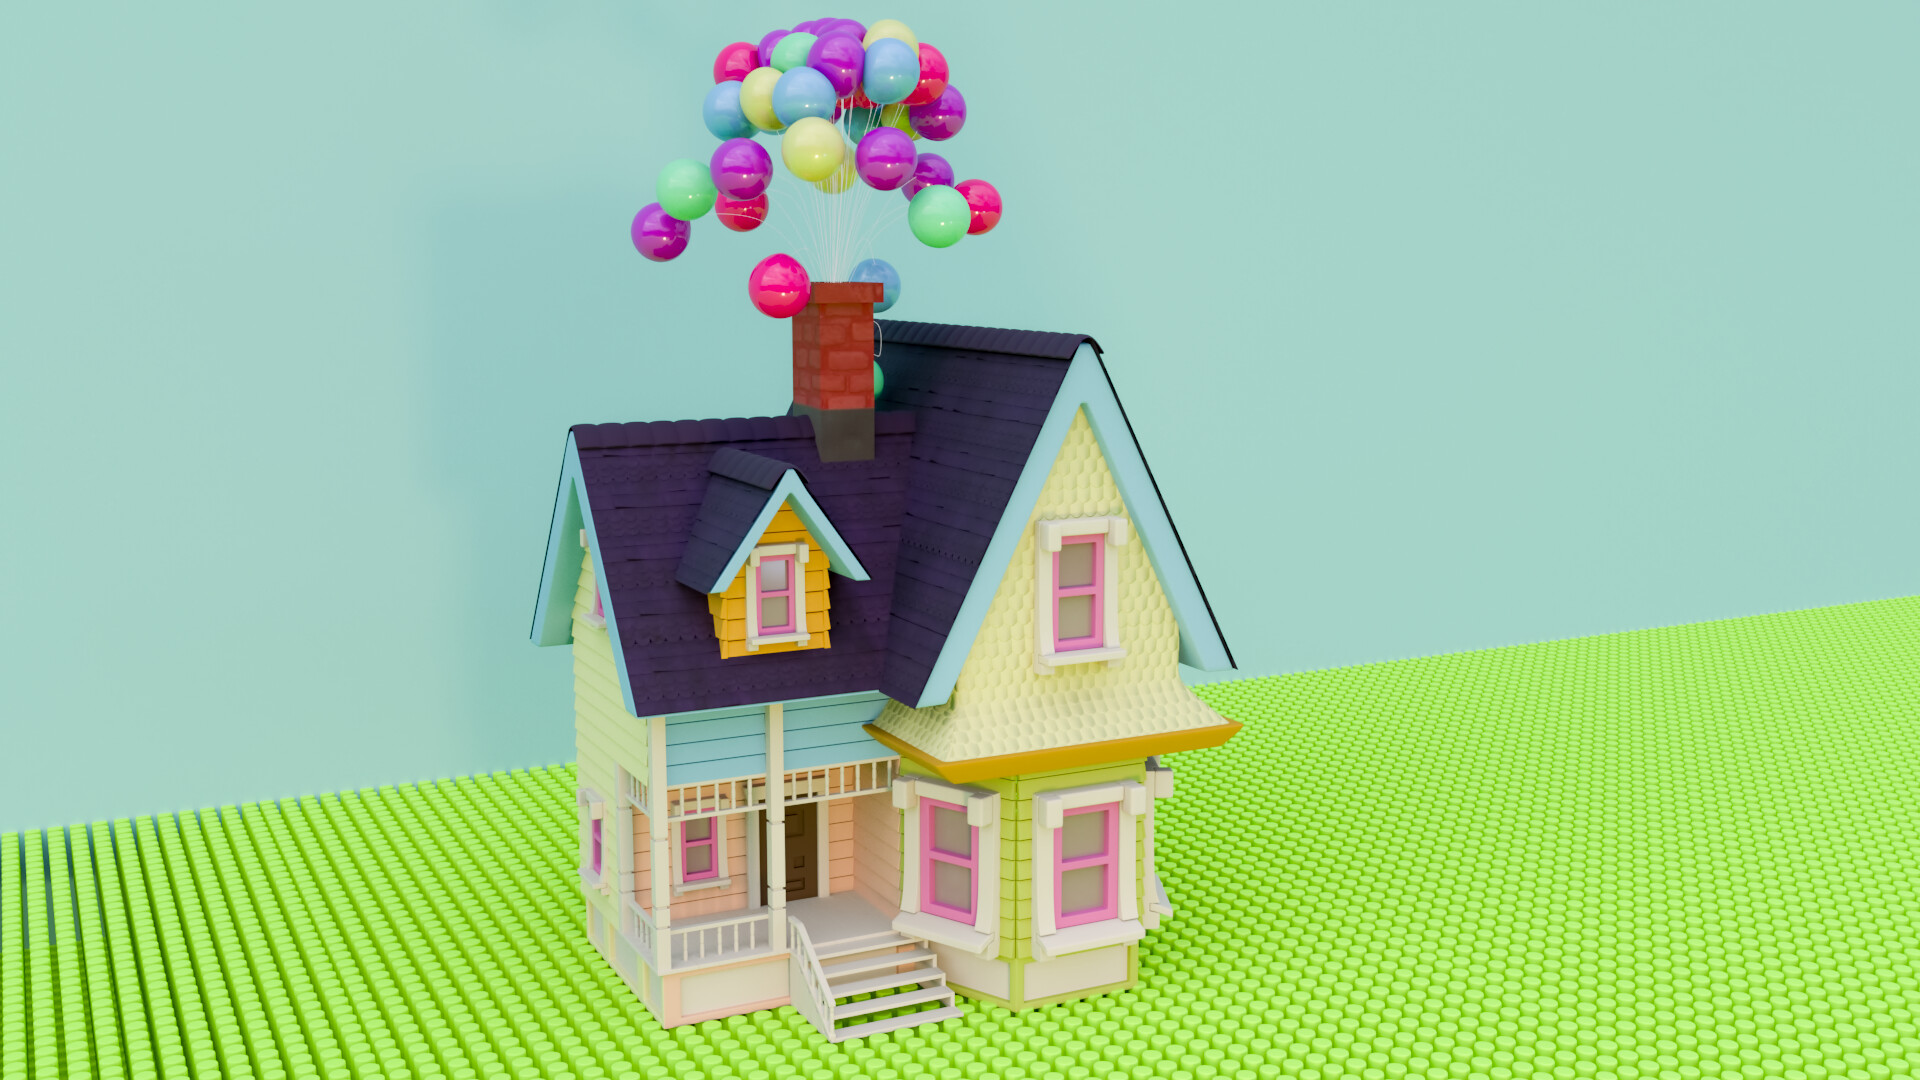 Bring Carl's Home from Disney/Pixar's 'UP' Home with this 3D